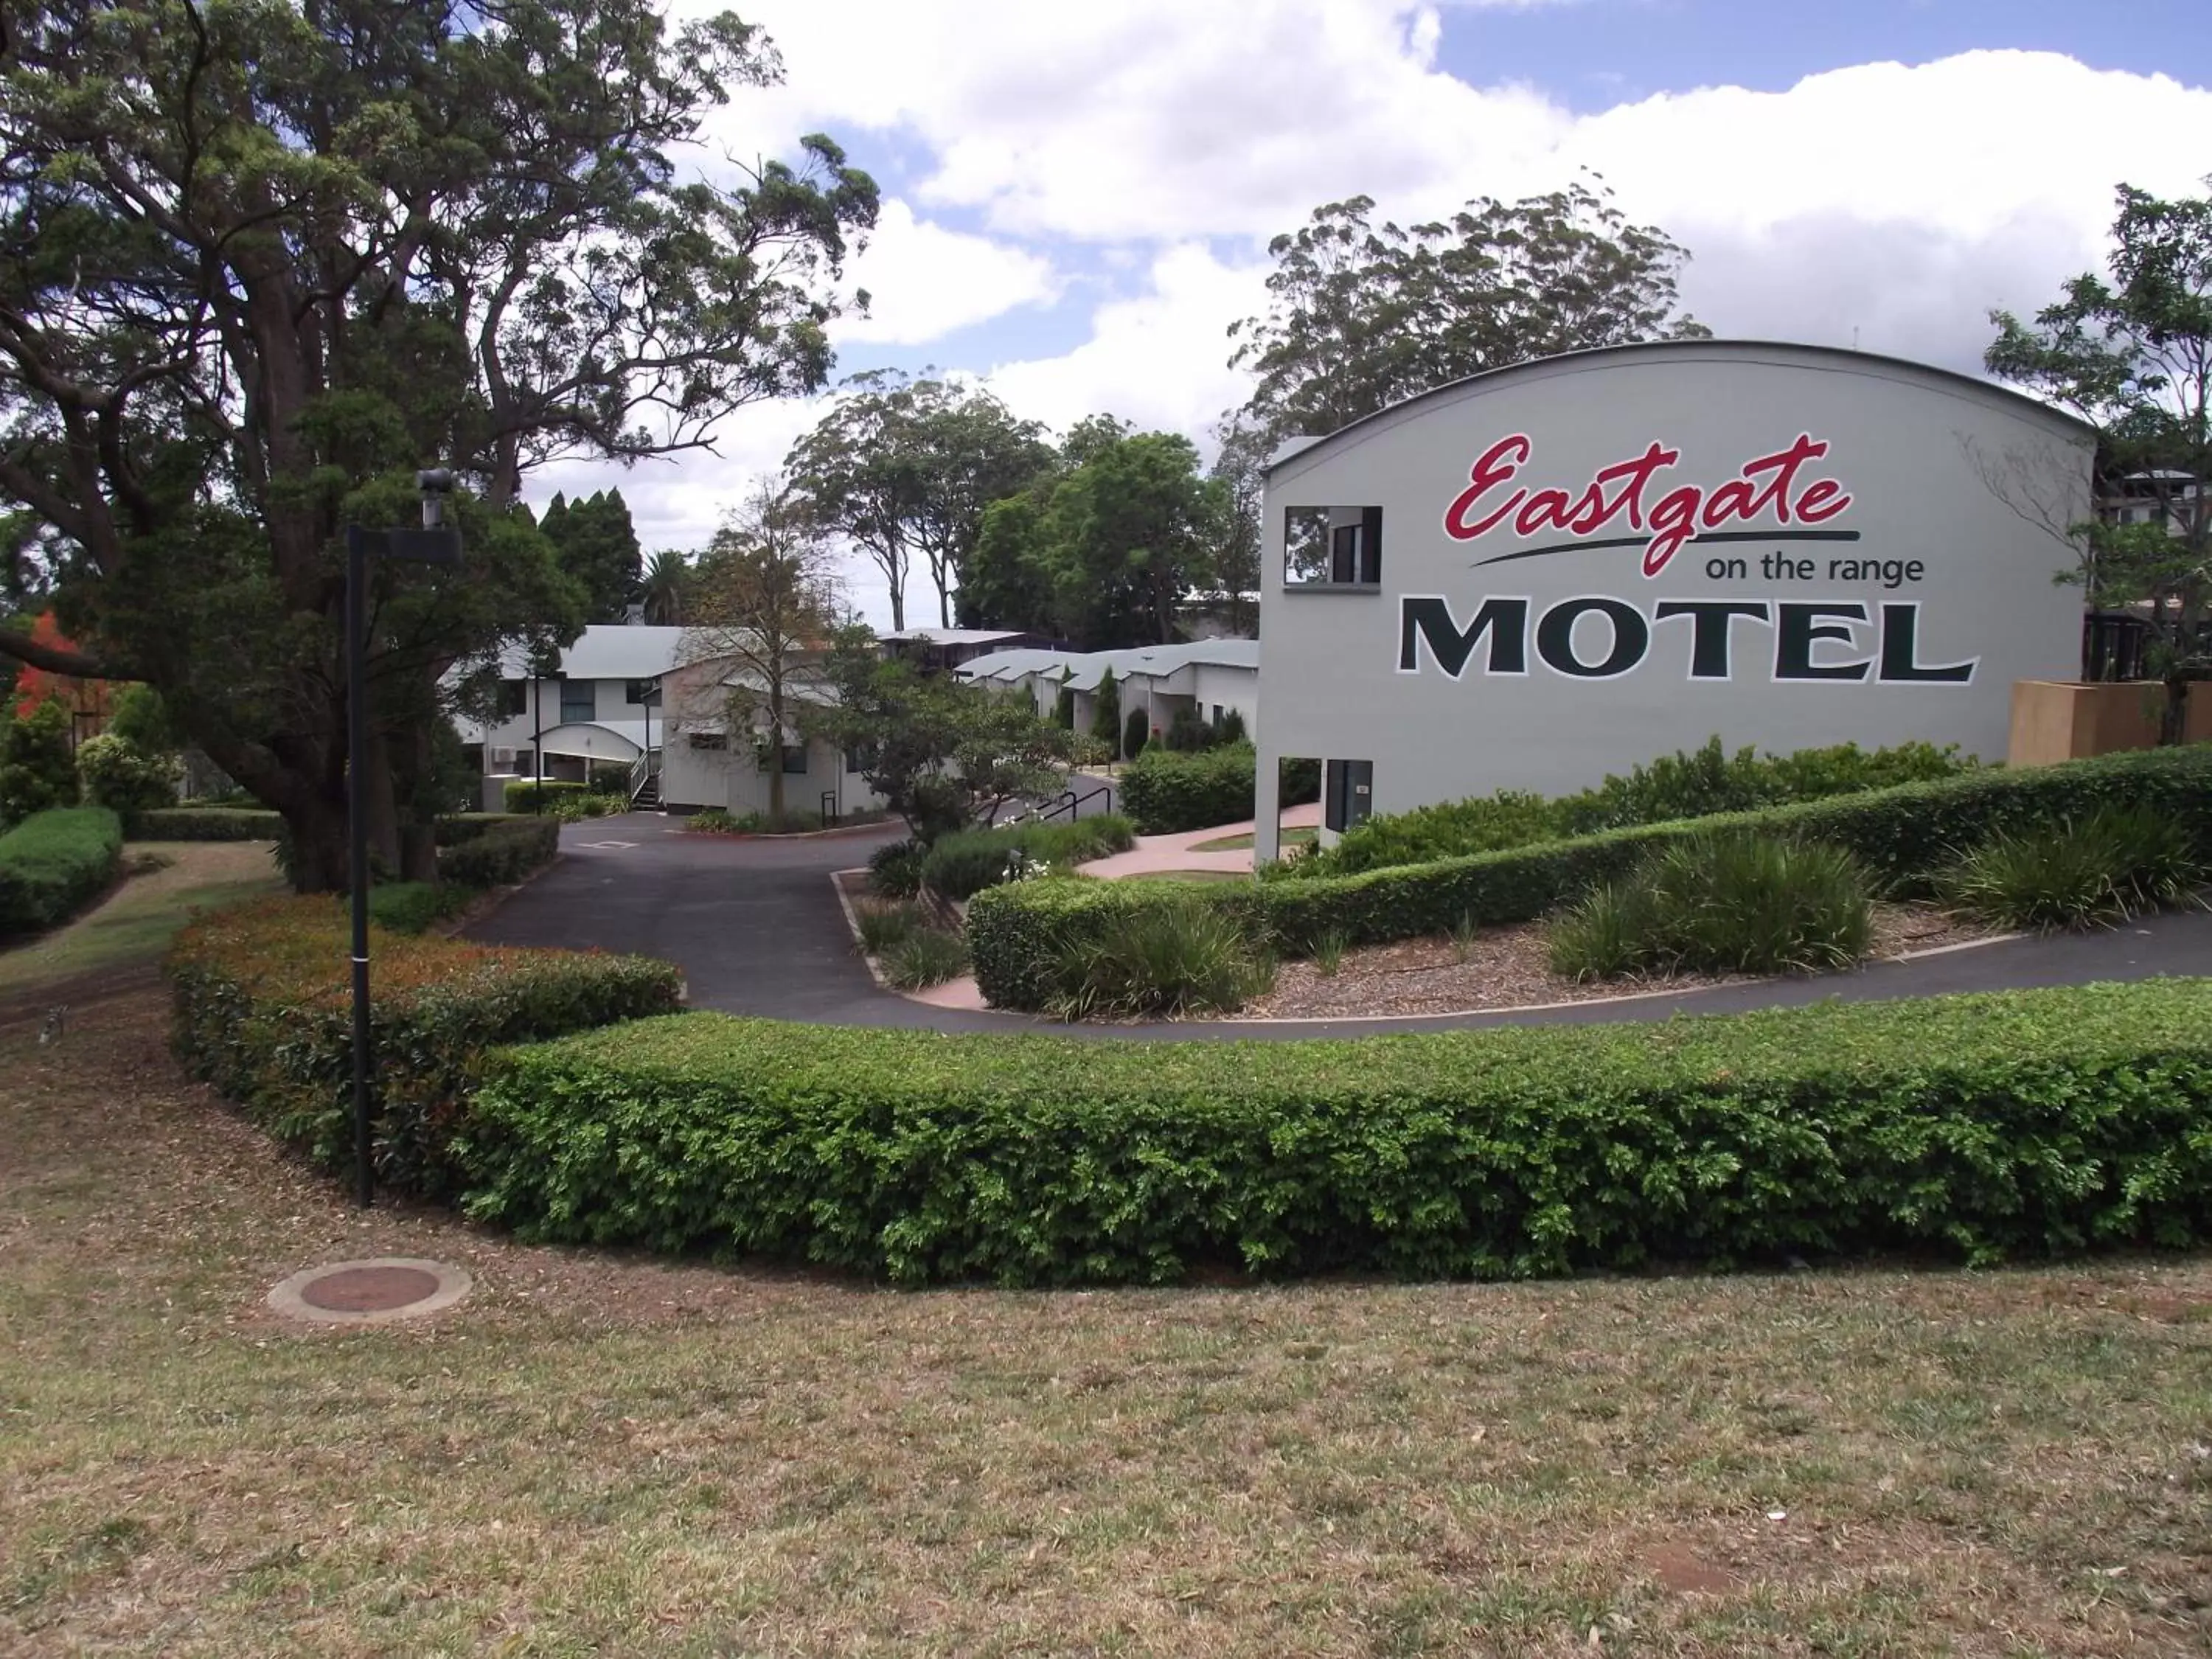 Property Building in Eastgate on the Range Motel